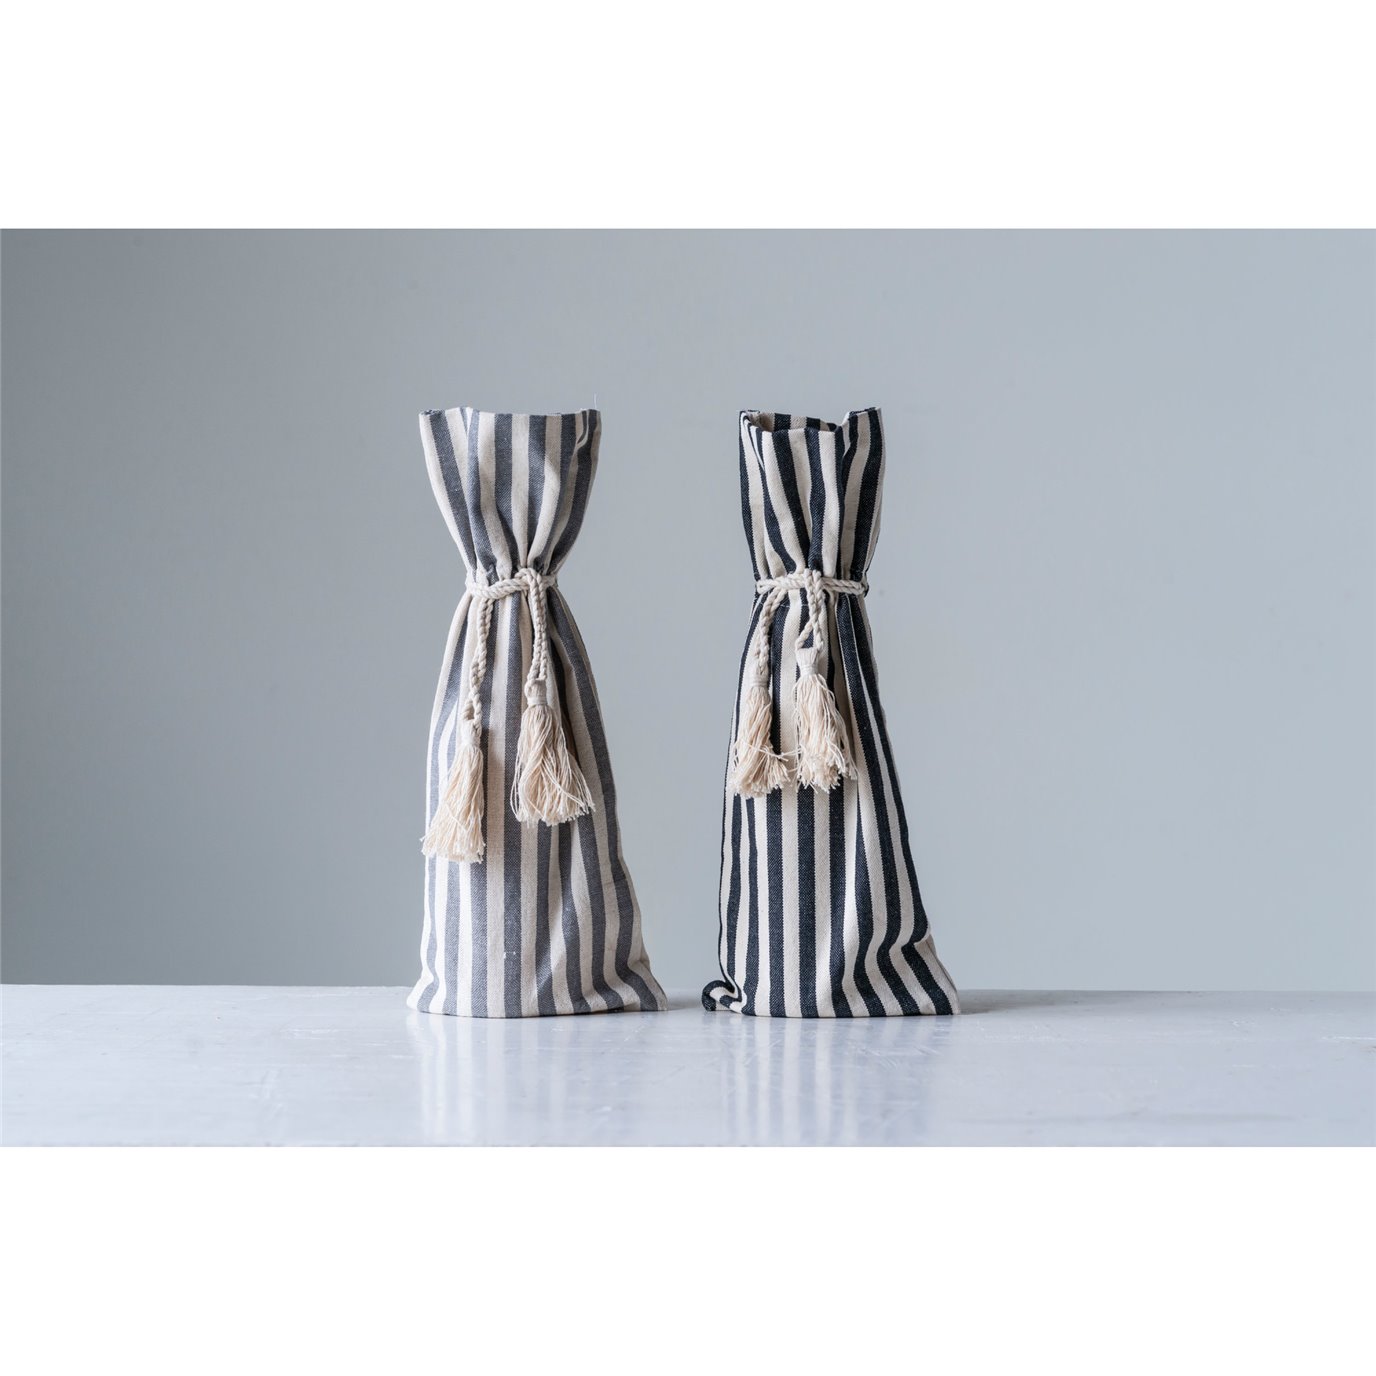 Grey Cotton Striped Wine Bag with Tassels (Set of 2 Colors)